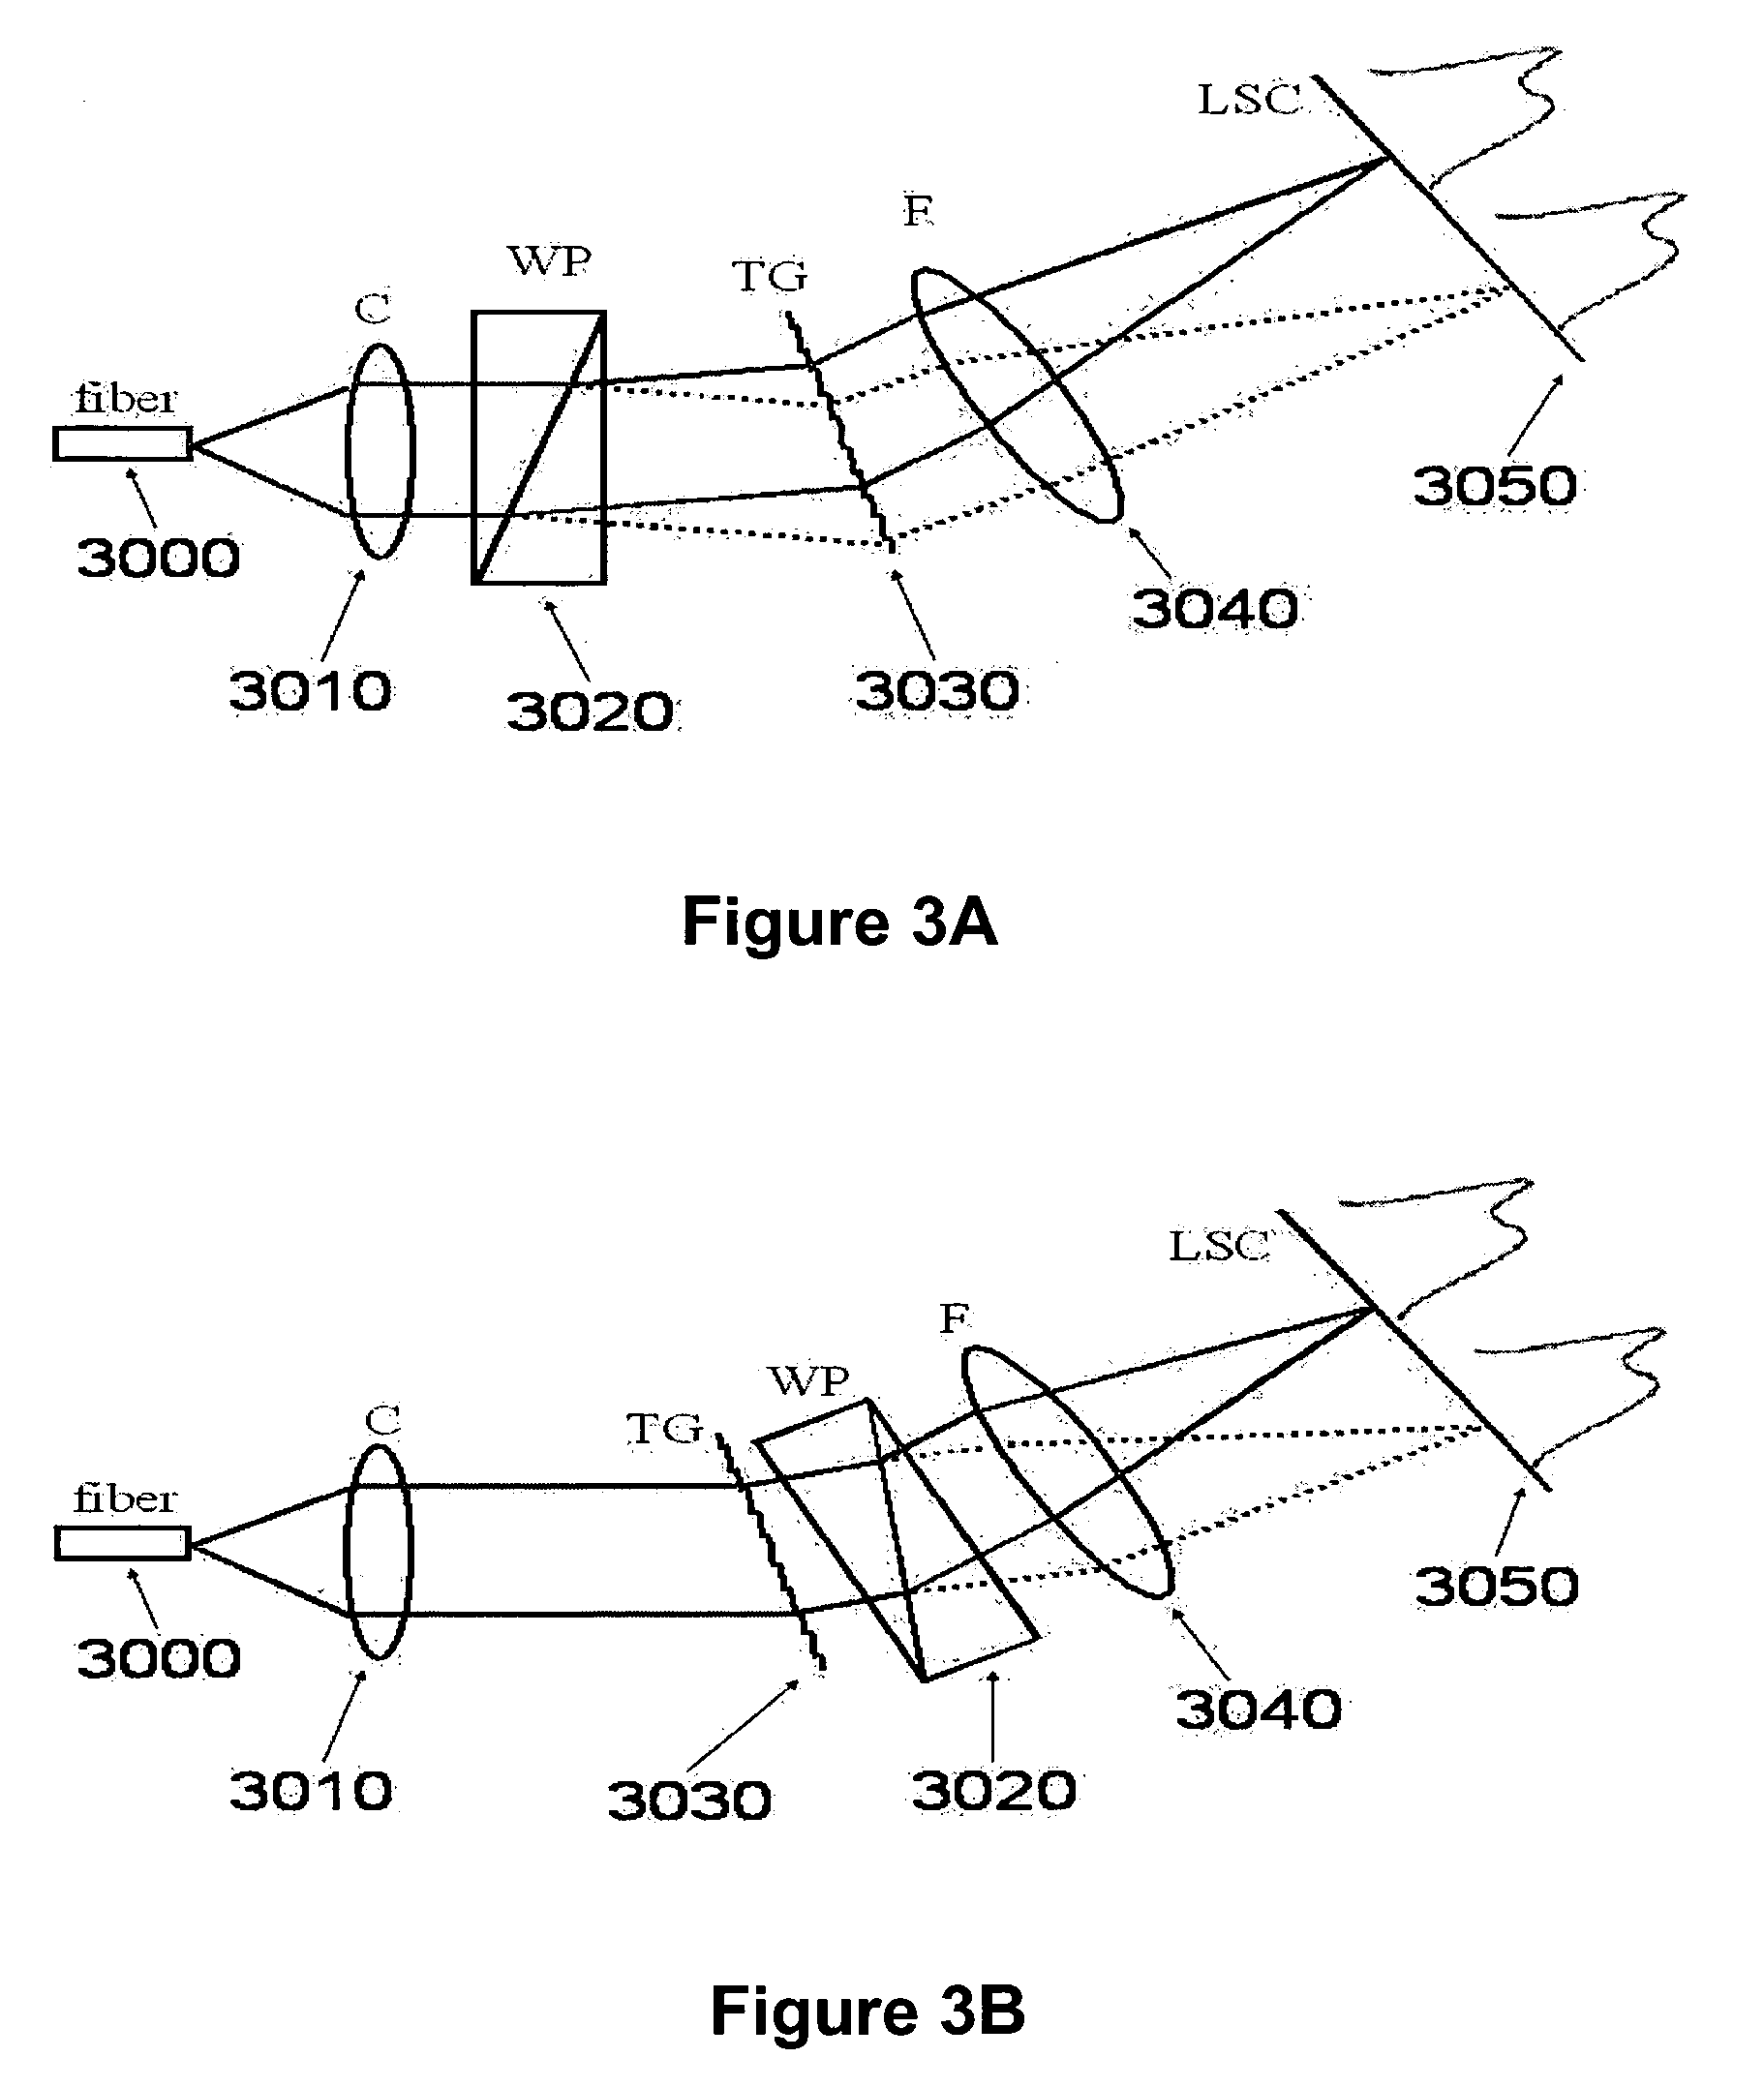 Arrangements, systems and methods capable of providing spectral-domain polarization-sensitive optical coherence tomography